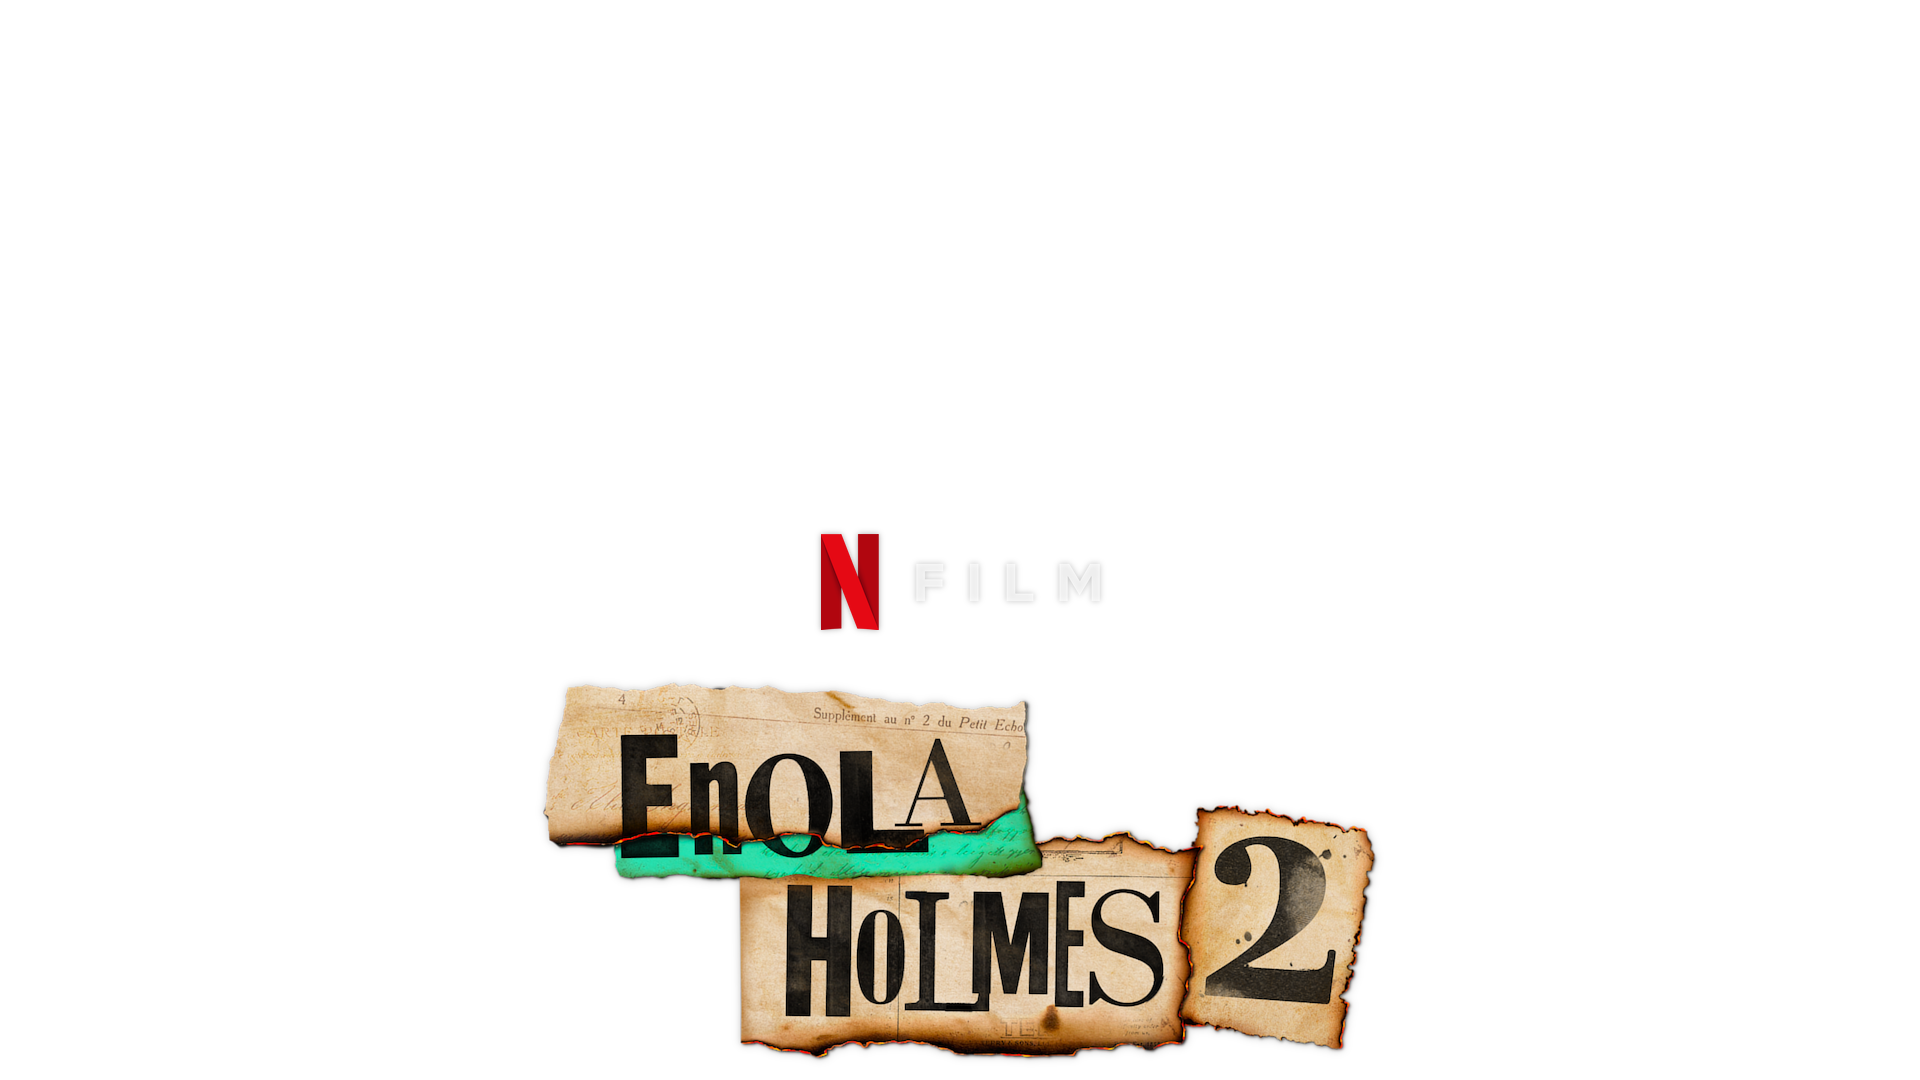 Best new family movies on Netflix? 'Enola Holmes 2' is excellent